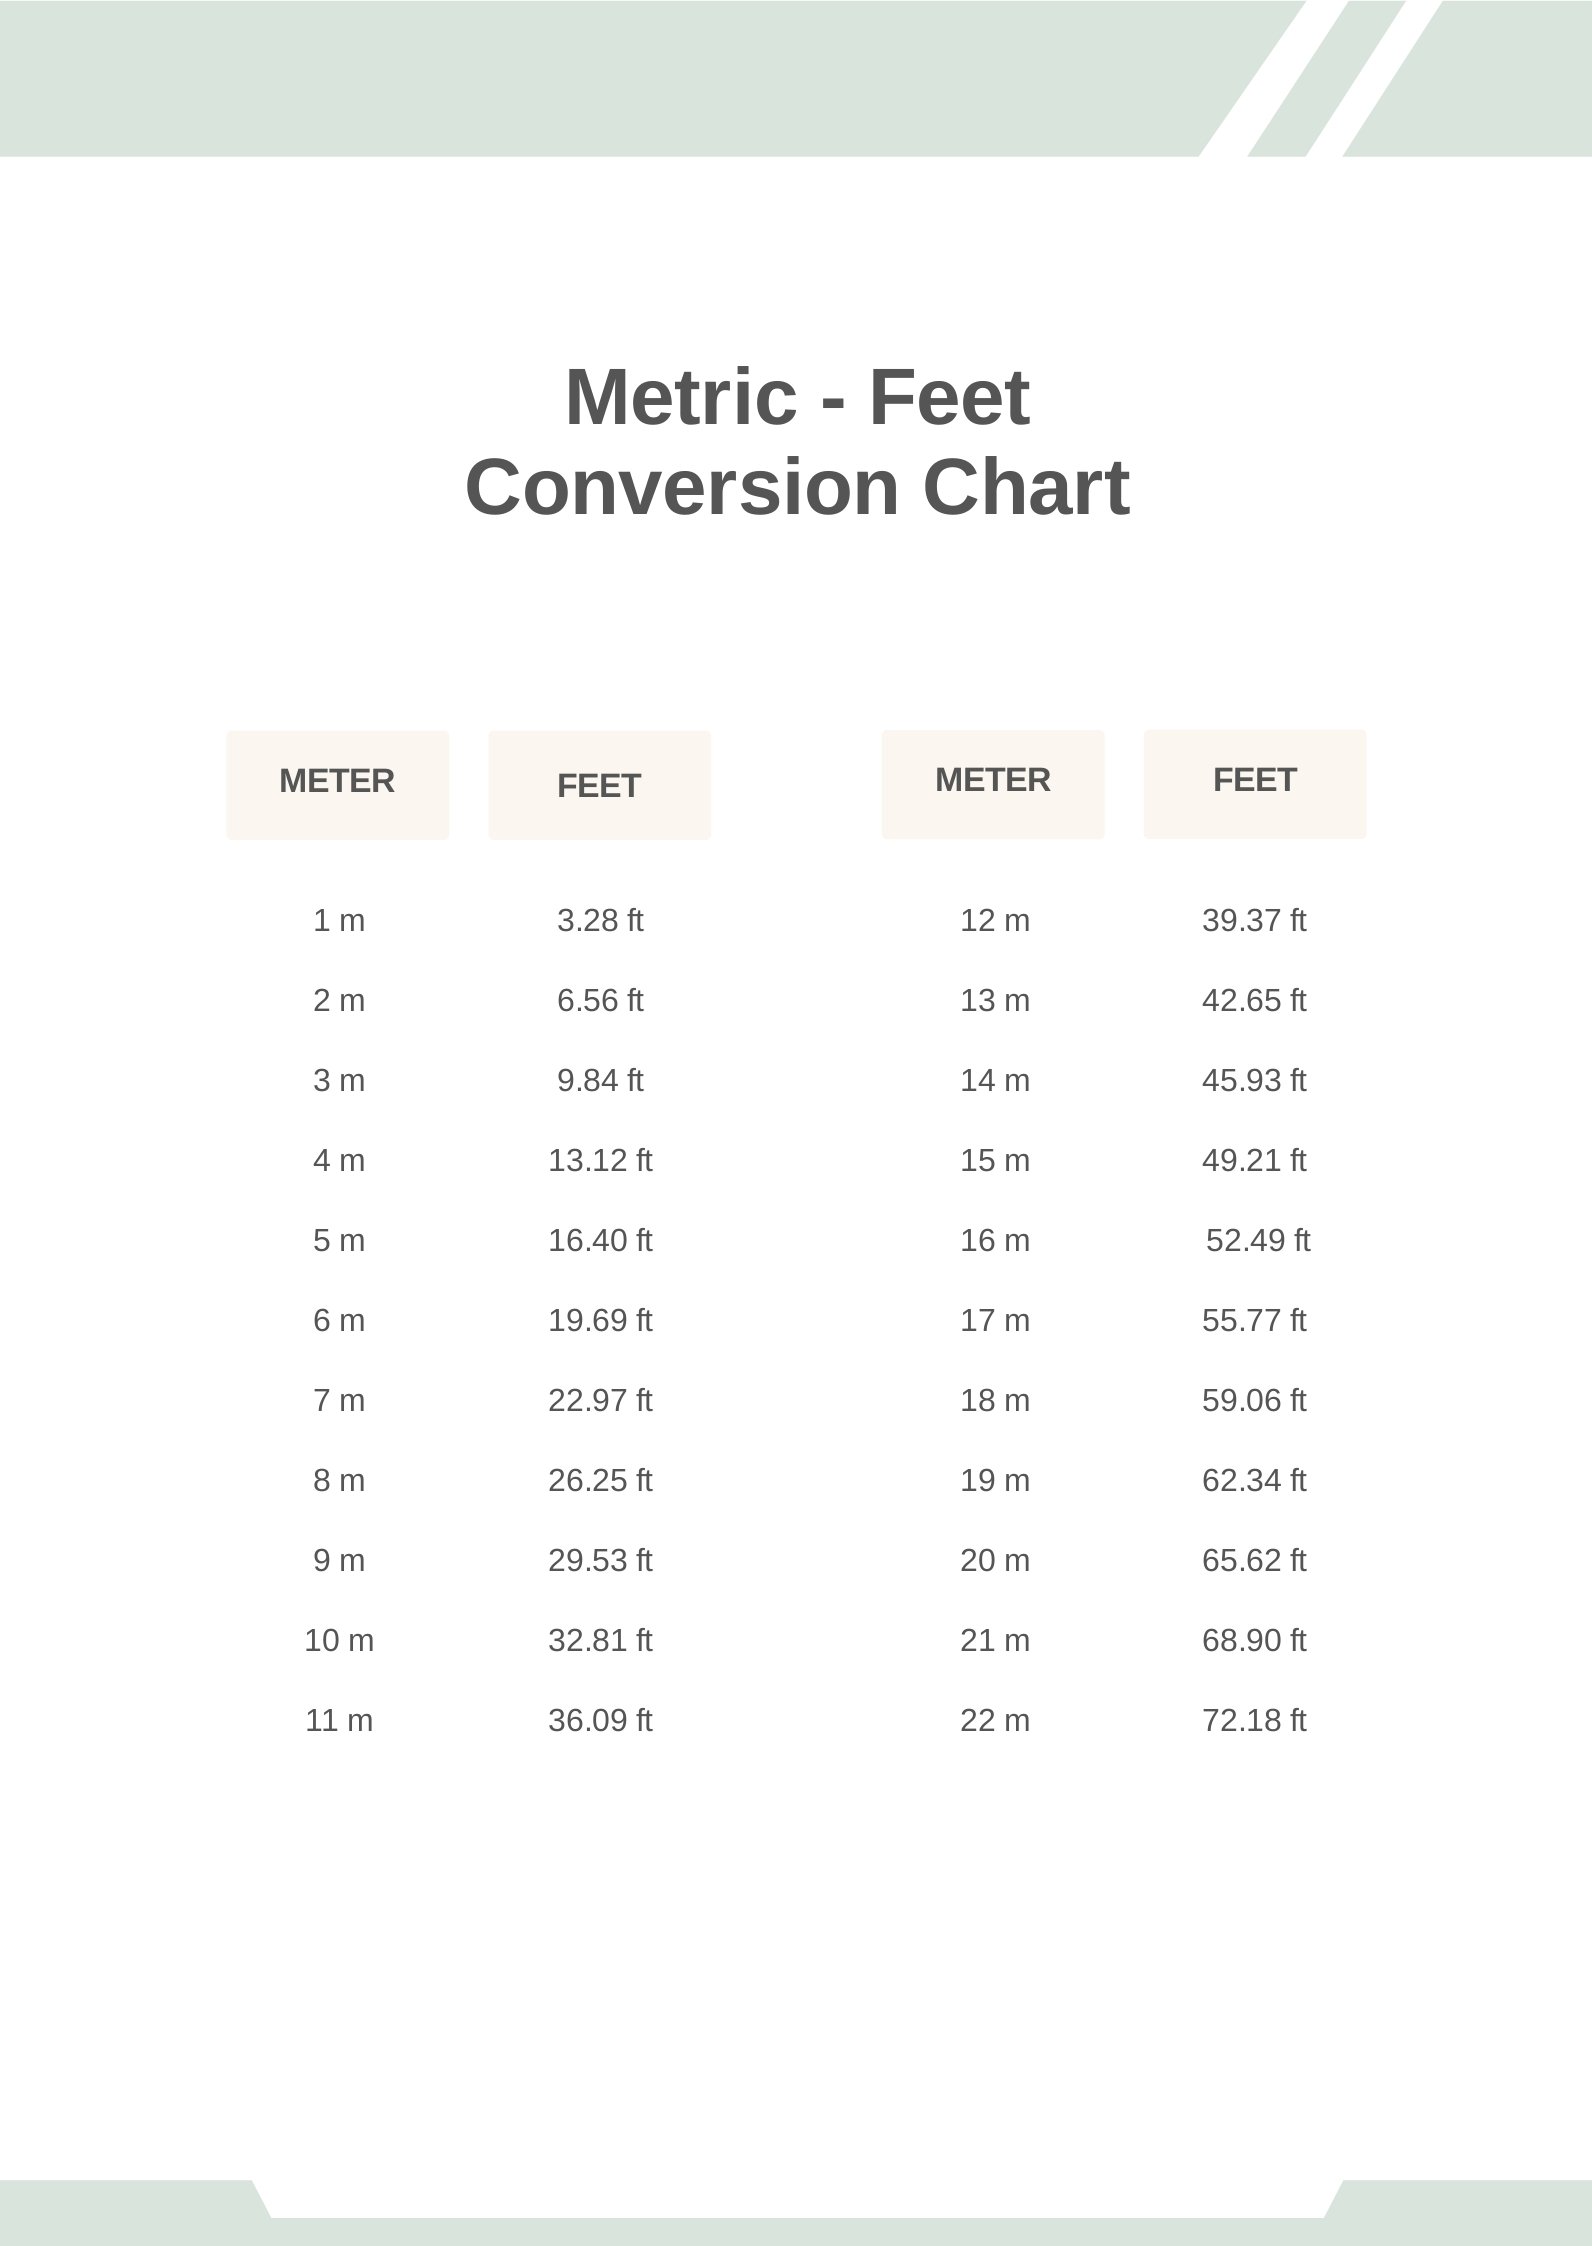 Metric to Feet Conversion Chart in PDF